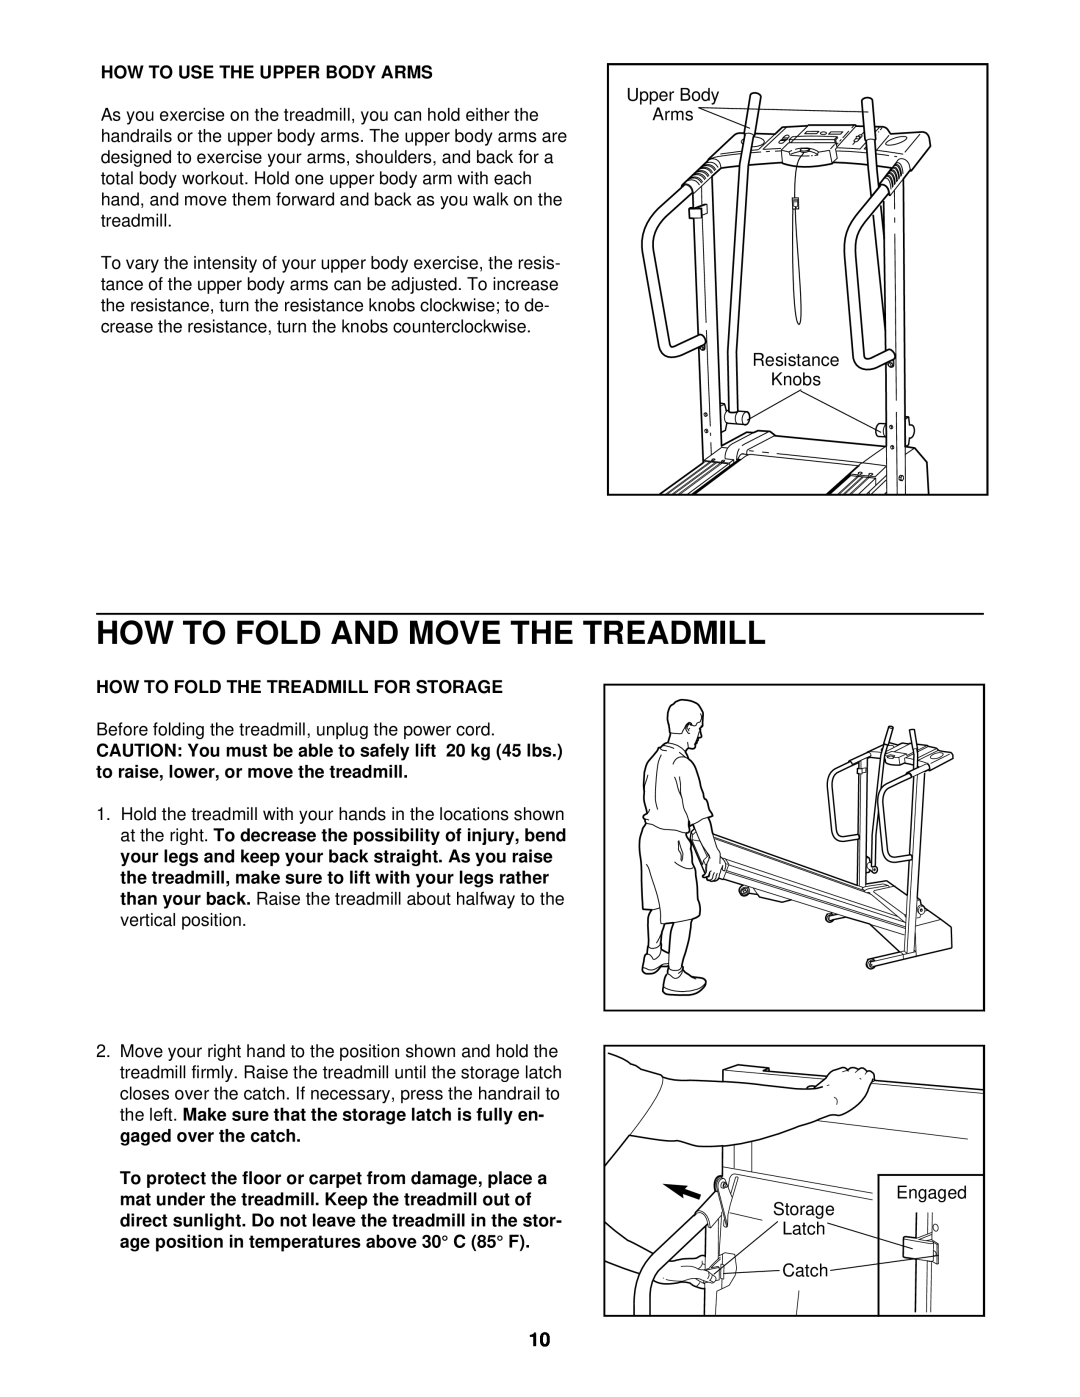 Weslo WCTL38410 How To Fold And Move The Treadmill, How To Use The Upper Body Arms, How To Fold The Treadmill For Storage 